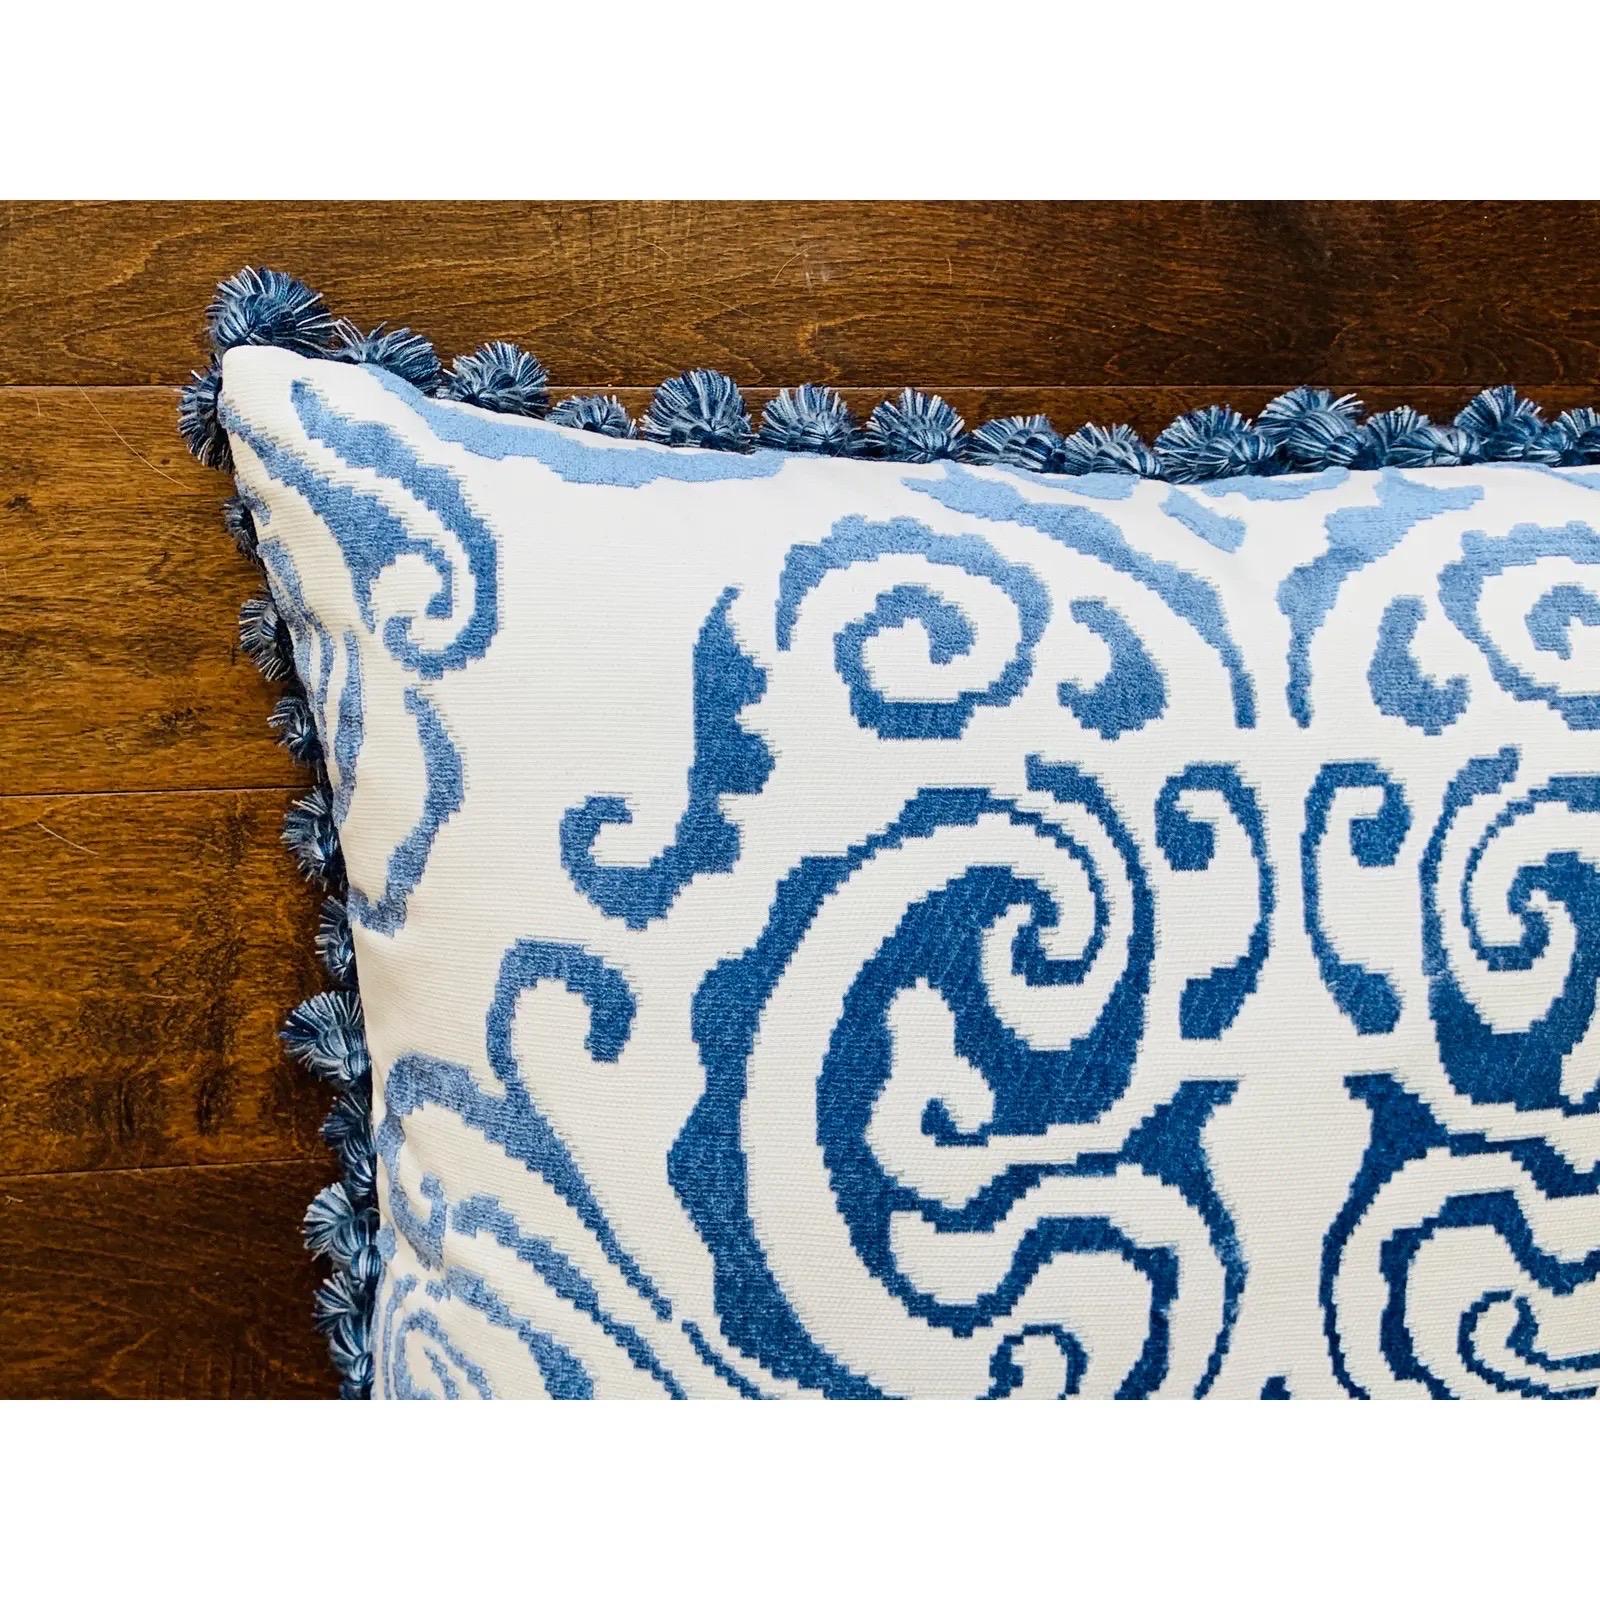 Scalamandré 'Cirrus Velvet Damask' White and Blue Pillows With Fringe, Pair In Excellent Condition For Sale In Richmond, VA